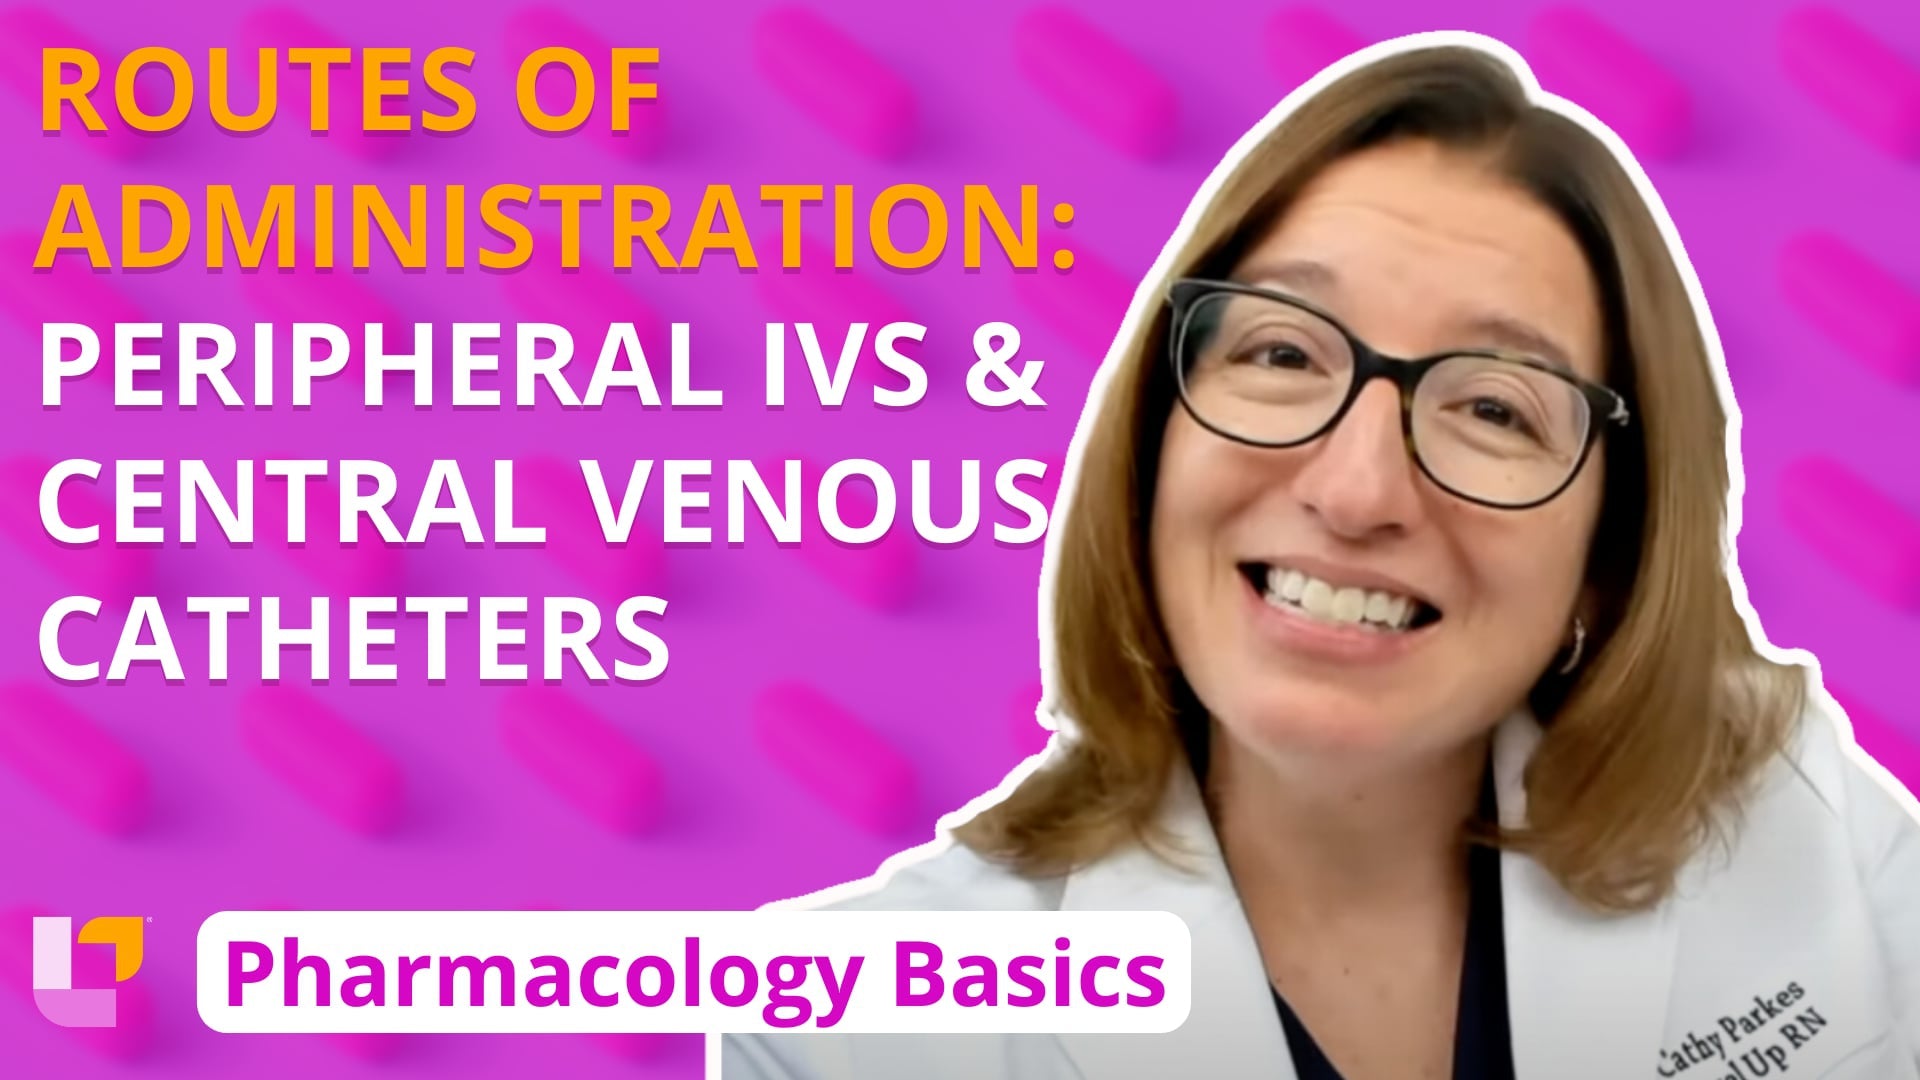 Pharm Basics, part 7: Routes of Administration: Peripheral IVs, Central Venous Catheters - LevelUpRN